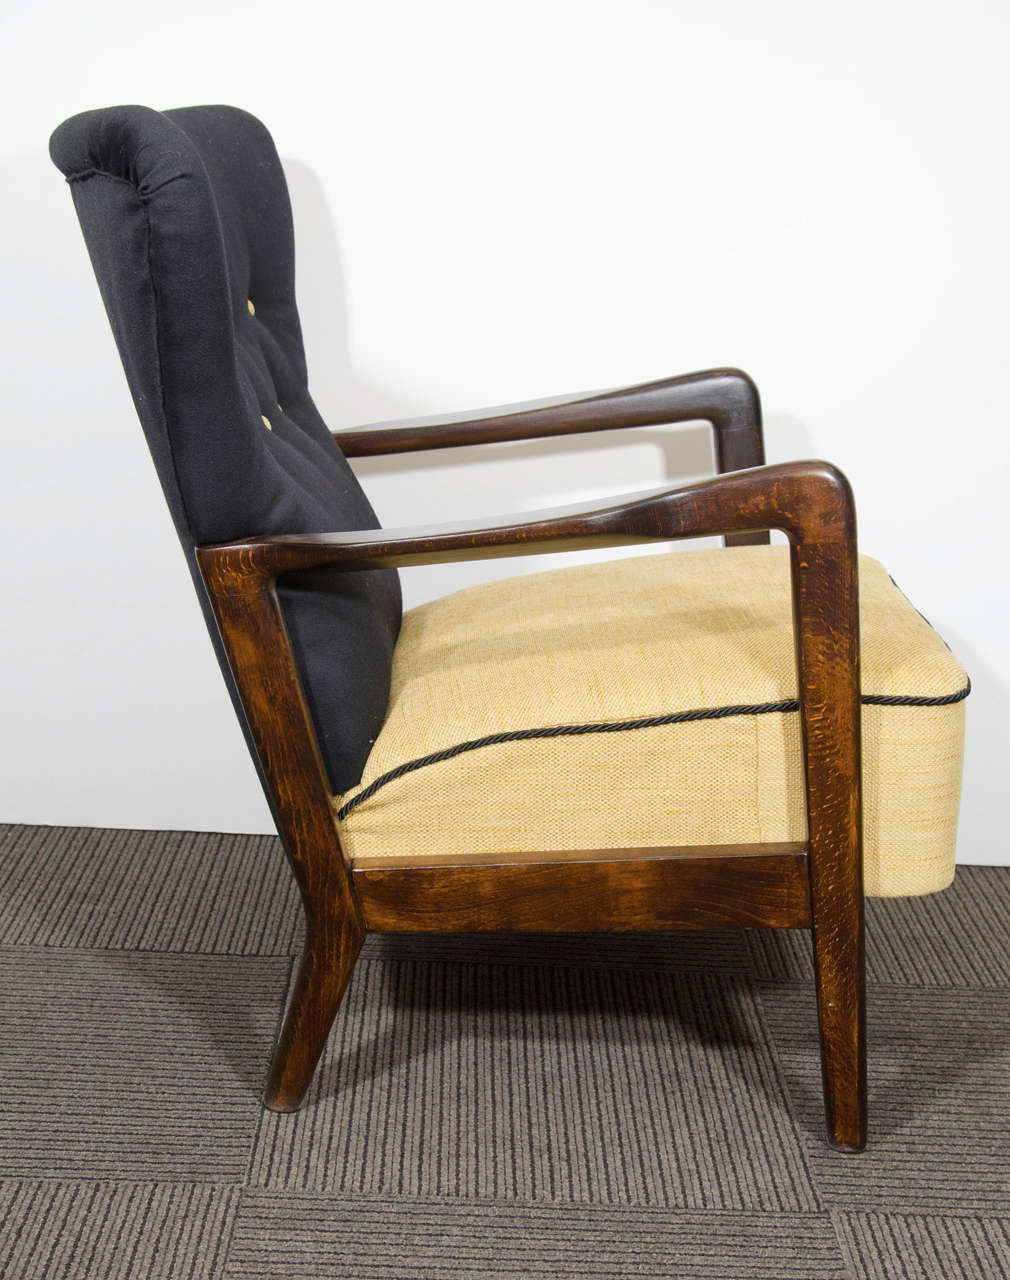 20th Century A Scandinavian Modern Pair of Fritz Hansen Two-Tone Black and Yellow Easy Chairs